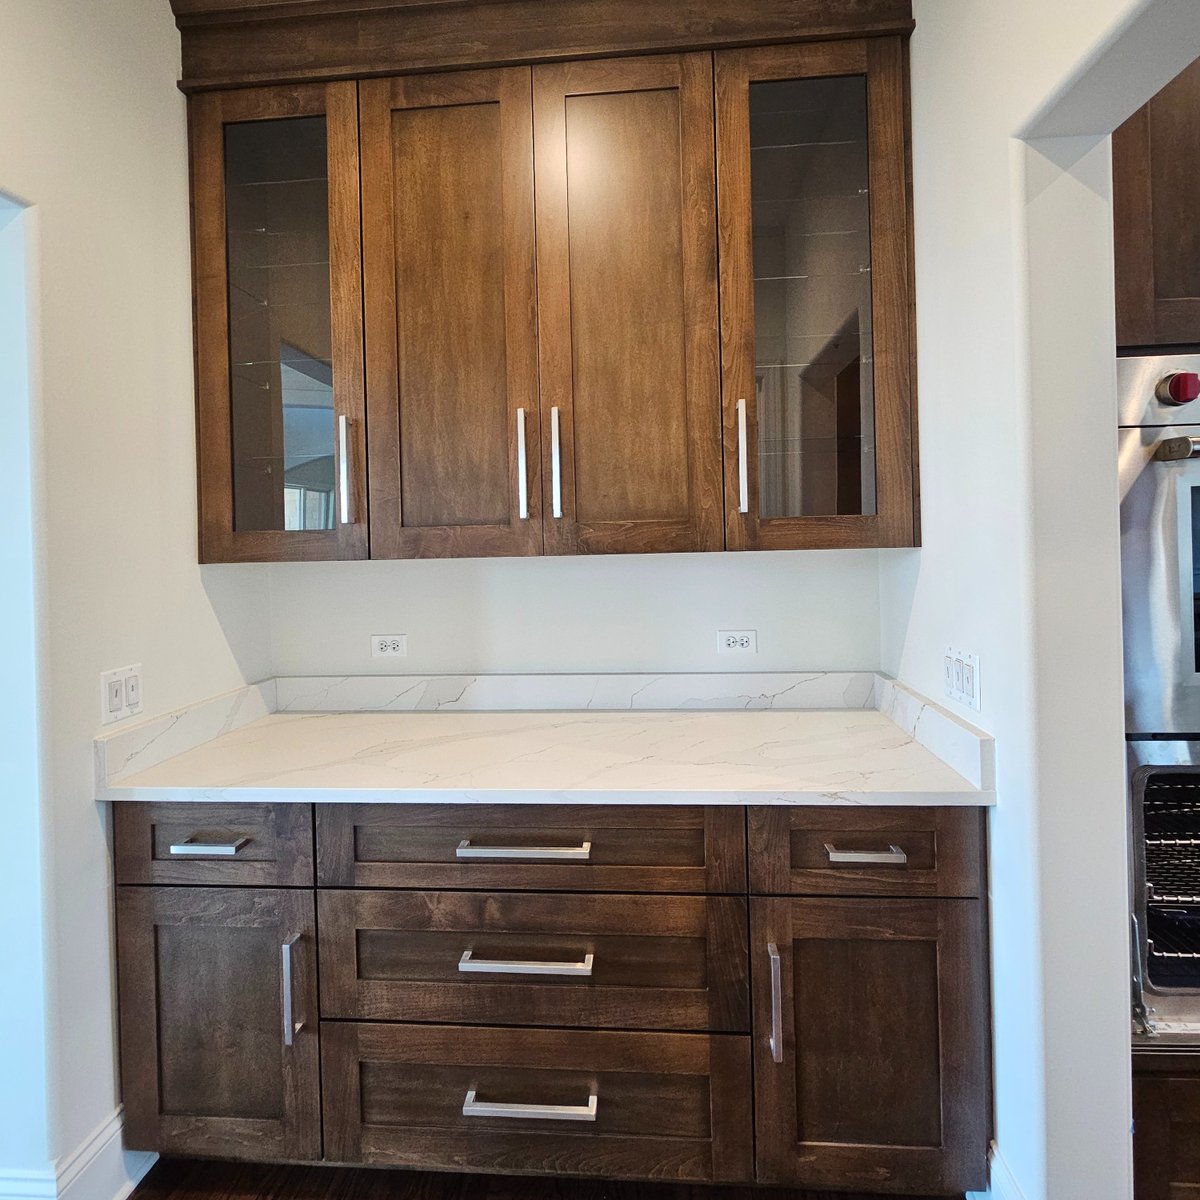 We love a nice #butlerspantry! The perfect place for all the items you don't use regularly but want nearby. Our #modelhome is open from 11 am - 5 pm at 4012 Alfalfa Ln #Naperville #newhome #newhomedesign #newhomebuilder #newhomeconstruction #homebuilder #customhome #kitcheninspo